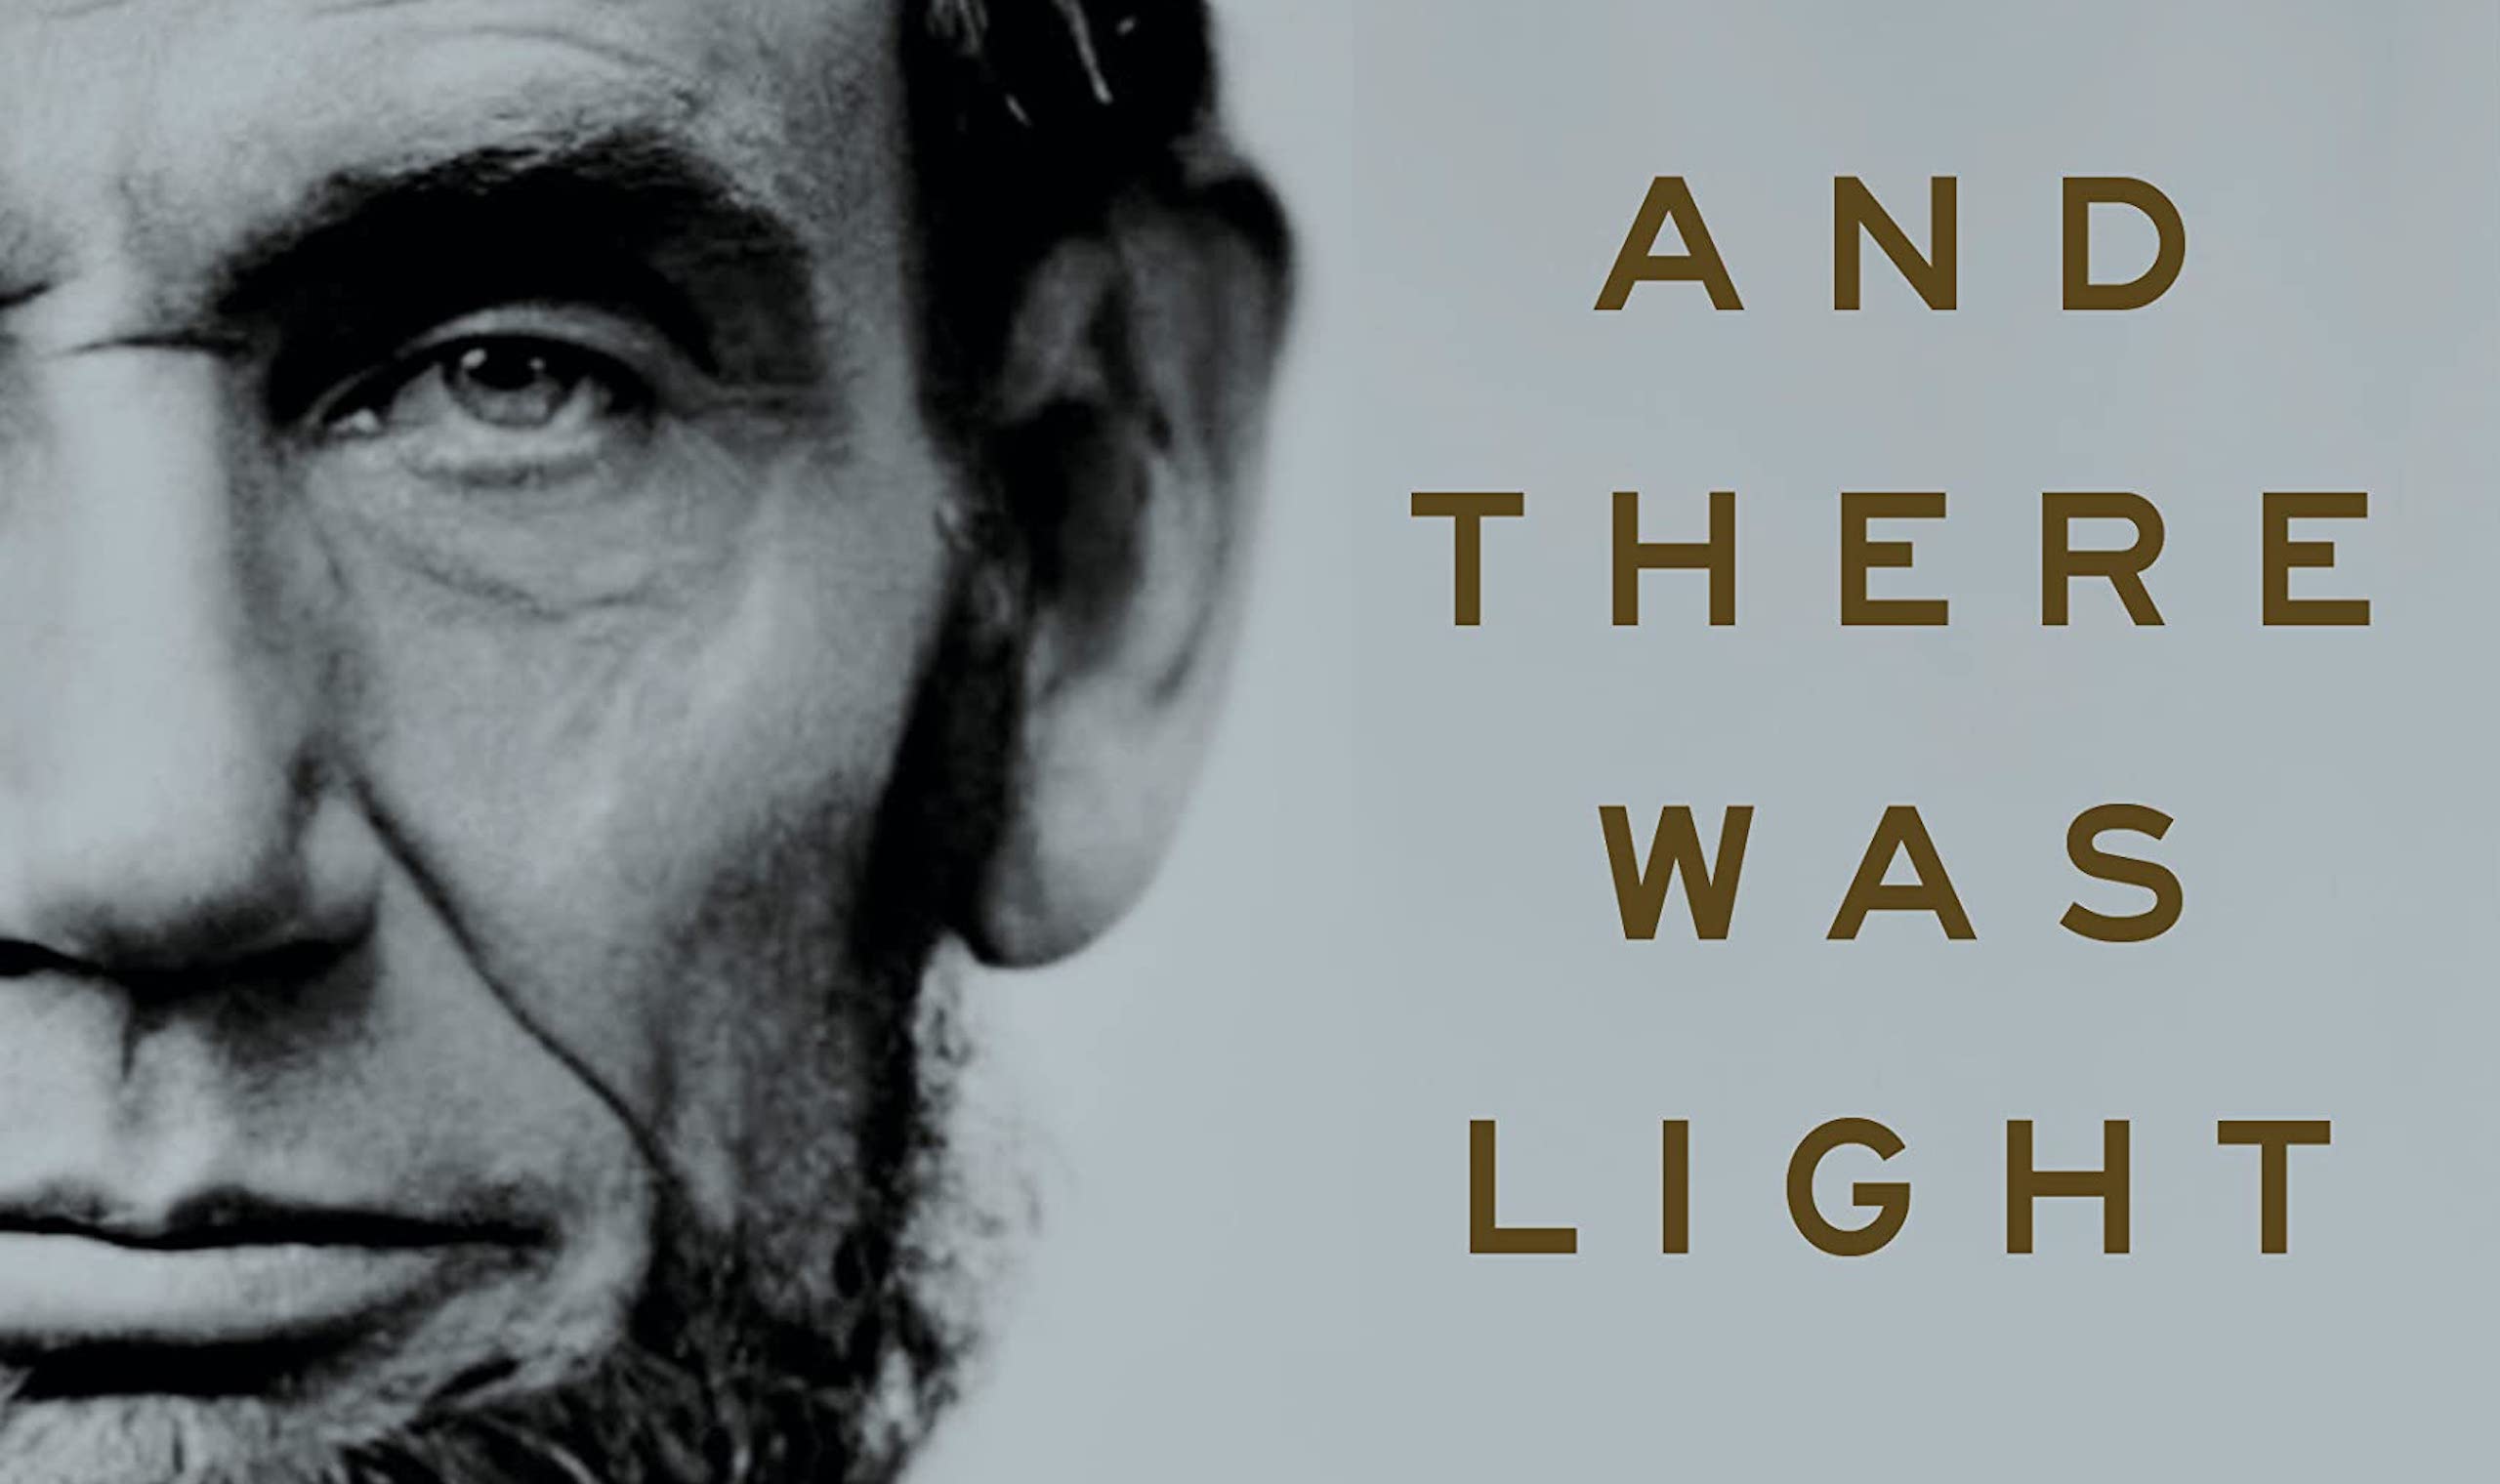 and-there-was-light-abraham-lincoln-and-the-american-struggle-by-jon-meacham.jpeg